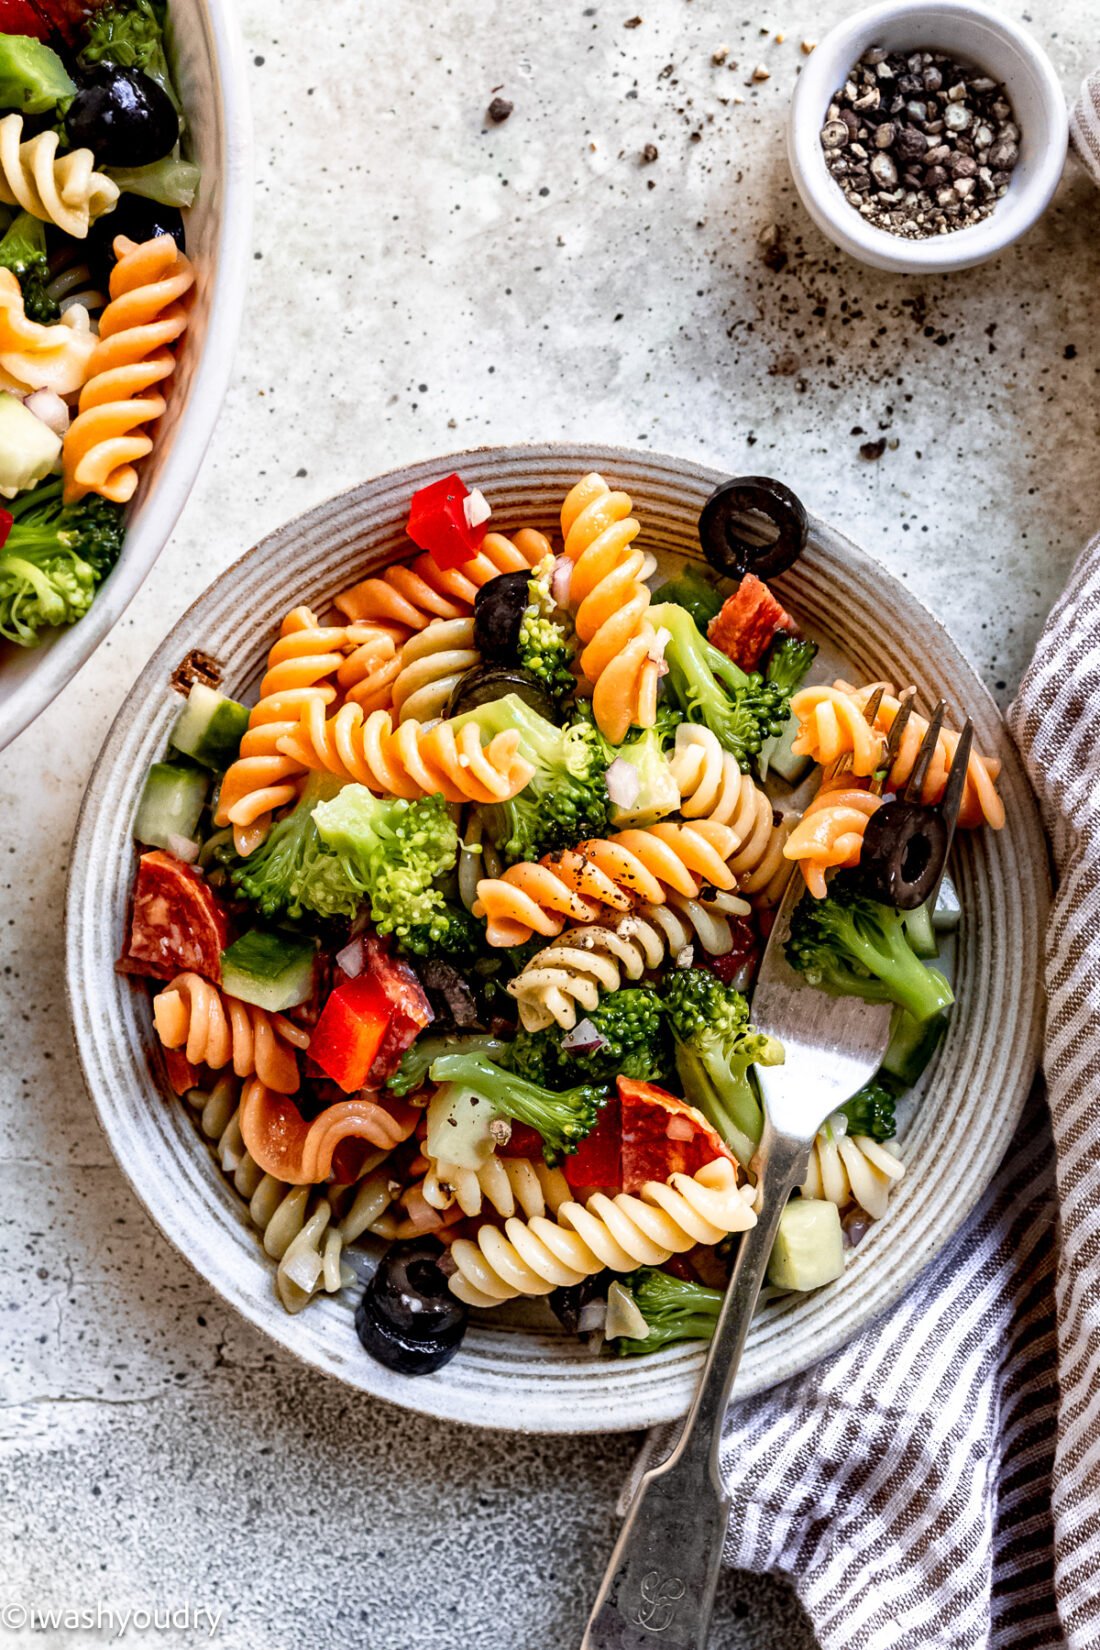 plateful of pasta salad with broccoli, olives and pepperoni.